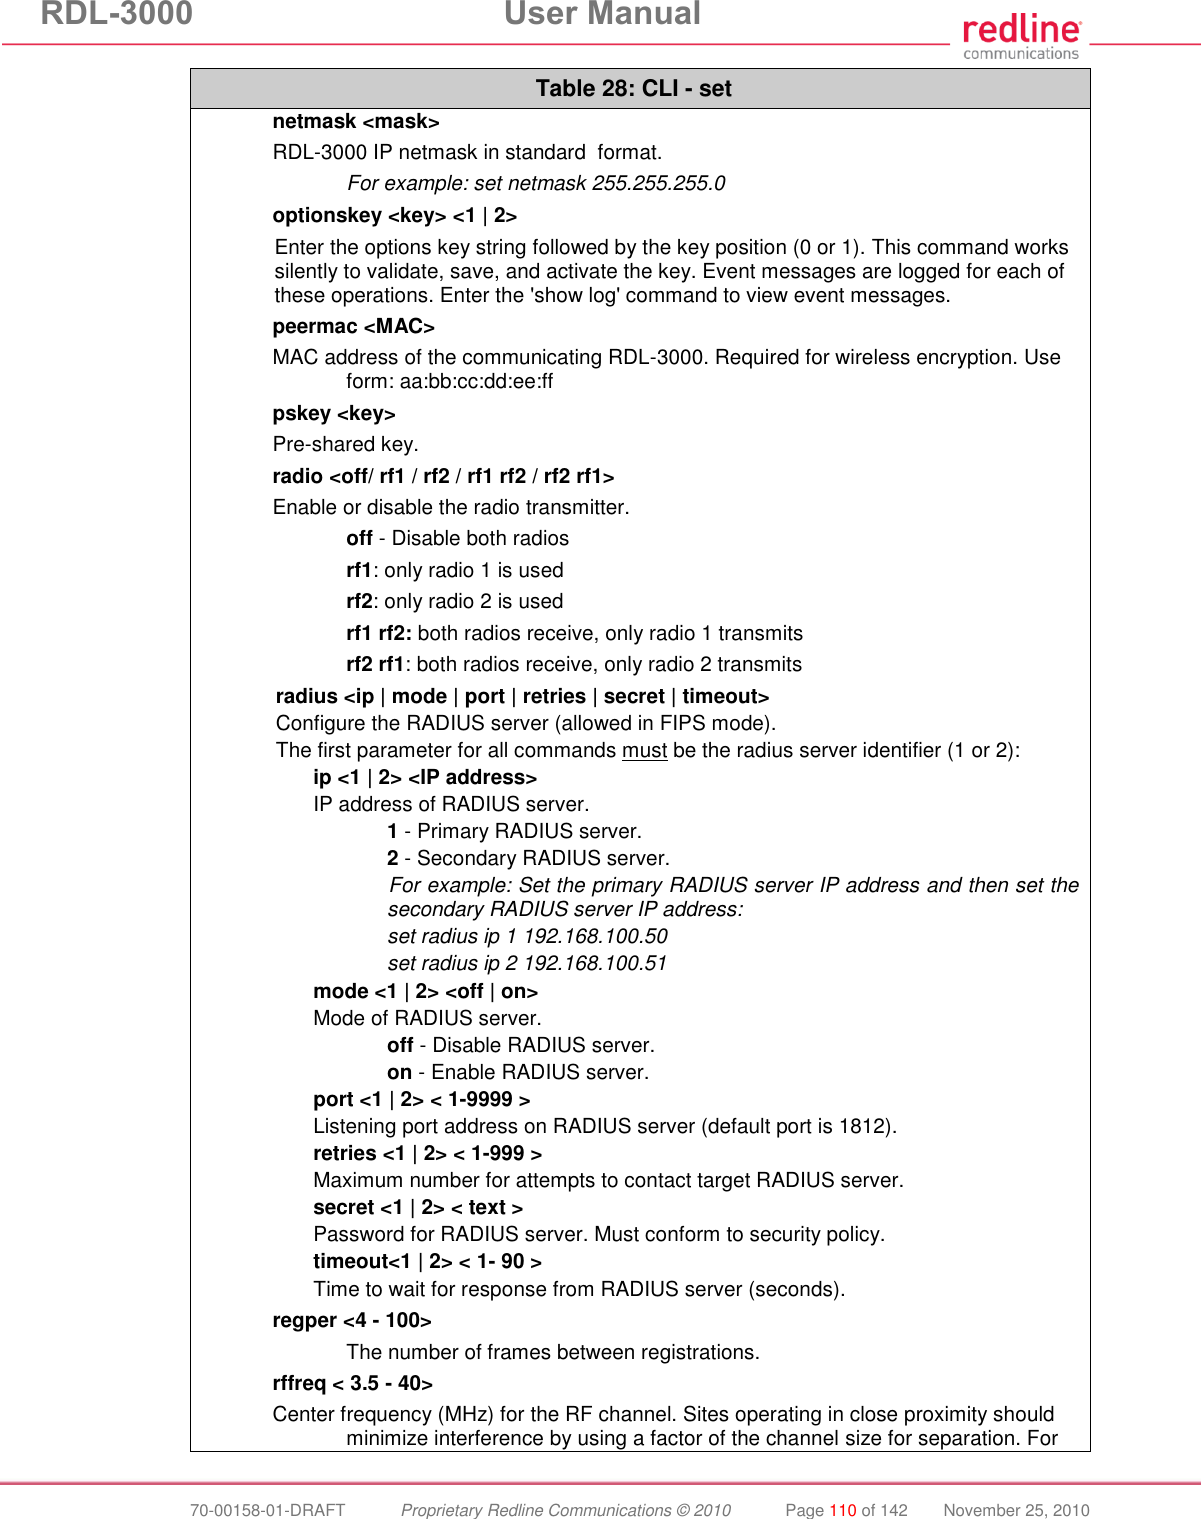 RDL-3000  User Manual  70-00158-01-DRAFT  Proprietary Redline Communications © 2010  Page 110 of 142  November 25, 2010 Table 28: CLI - set netmask &lt;mask&gt; RDL-3000 IP netmask in standard  format.   For example: set netmask 255.255.255.0 optionskey &lt;key&gt; &lt;1 | 2&gt; Enter the options key string followed by the key position (0 or 1). This command works silently to validate, save, and activate the key. Event messages are logged for each of these operations. Enter the &apos;show log&apos; command to view event messages. peermac &lt;MAC&gt; MAC address of the communicating RDL-3000. Required for wireless encryption. Use form: aa:bb:cc:dd:ee:ff pskey &lt;key&gt; Pre-shared key. radio &lt;off/ rf1 / rf2 / rf1 rf2 / rf2 rf1&gt; Enable or disable the radio transmitter.  off - Disable both radios  rf1: only radio 1 is used  rf2: only radio 2 is used  rf1 rf2: both radios receive, only radio 1 transmits  rf2 rf1: both radios receive, only radio 2 transmits radius &lt;ip | mode | port | retries | secret | timeout&gt; Configure the RADIUS server (allowed in FIPS mode). The first parameter for all commands must be the radius server identifier (1 or 2):  ip &lt;1 | 2&gt; &lt;IP address&gt; IP address of RADIUS server.   1 - Primary RADIUS server.   2 - Secondary RADIUS server. For example: Set the primary RADIUS server IP address and then set the secondary RADIUS server IP address:  set radius ip 1 192.168.100.50  set radius ip 2 192.168.100.51 mode &lt;1 | 2&gt; &lt;off | on&gt; Mode of RADIUS server.   off - Disable RADIUS server.  on - Enable RADIUS server. port &lt;1 | 2&gt; &lt; 1-9999 &gt; Listening port address on RADIUS server (default port is 1812). retries &lt;1 | 2&gt; &lt; 1-999 &gt; Maximum number for attempts to contact target RADIUS server. secret &lt;1 | 2&gt; &lt; text &gt; Password for RADIUS server. Must conform to security policy. timeout&lt;1 | 2&gt; &lt; 1- 90 &gt; Time to wait for response from RADIUS server (seconds). regper &lt;4 - 100&gt;  The number of frames between registrations. rffreq &lt; 3.5 - 40&gt; Center frequency (MHz) for the RF channel. Sites operating in close proximity should minimize interference by using a factor of the channel size for separation. For 